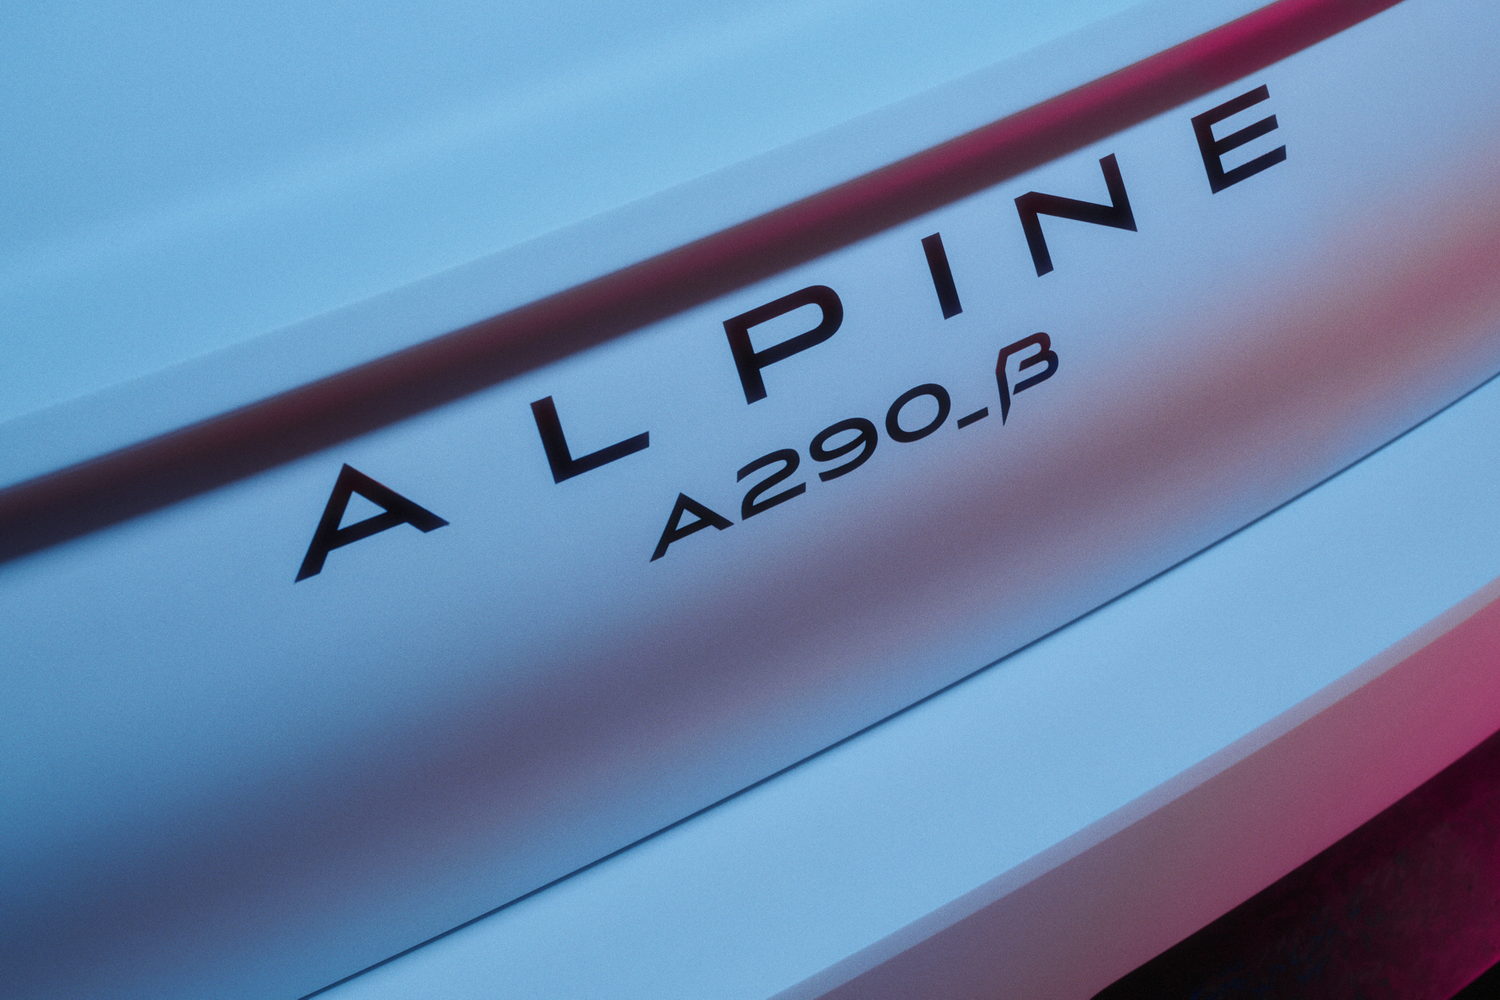 Alpine goes electric with A290_β hatch